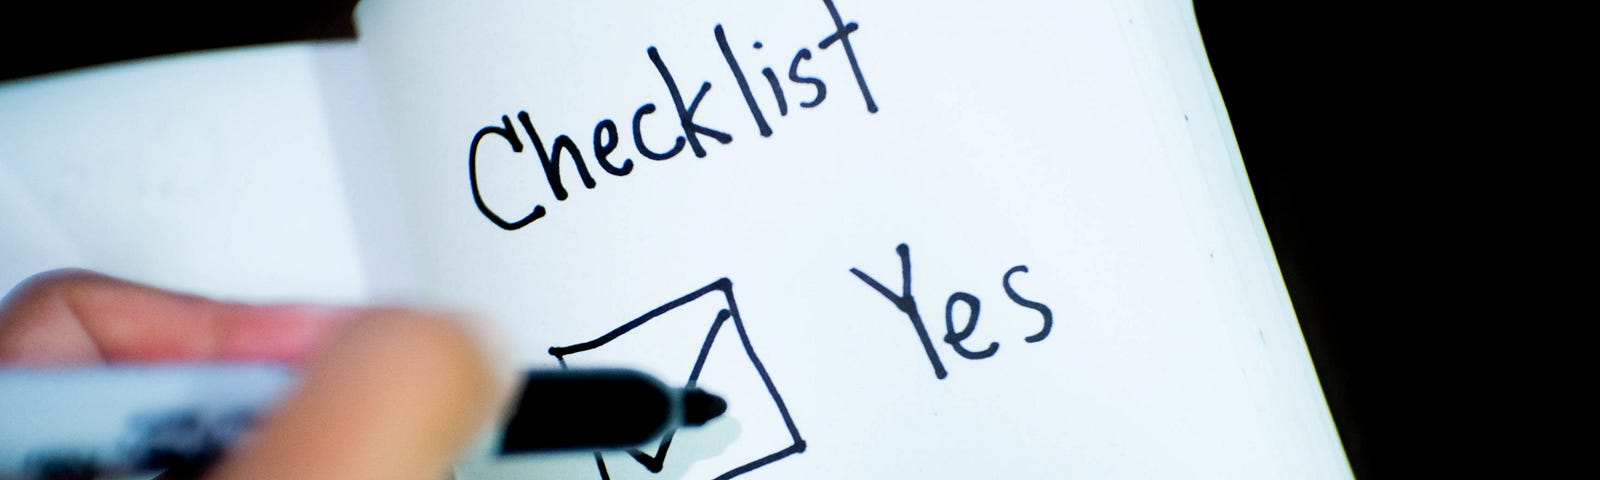 Image of a blank page with checklist of Yes or No written on it